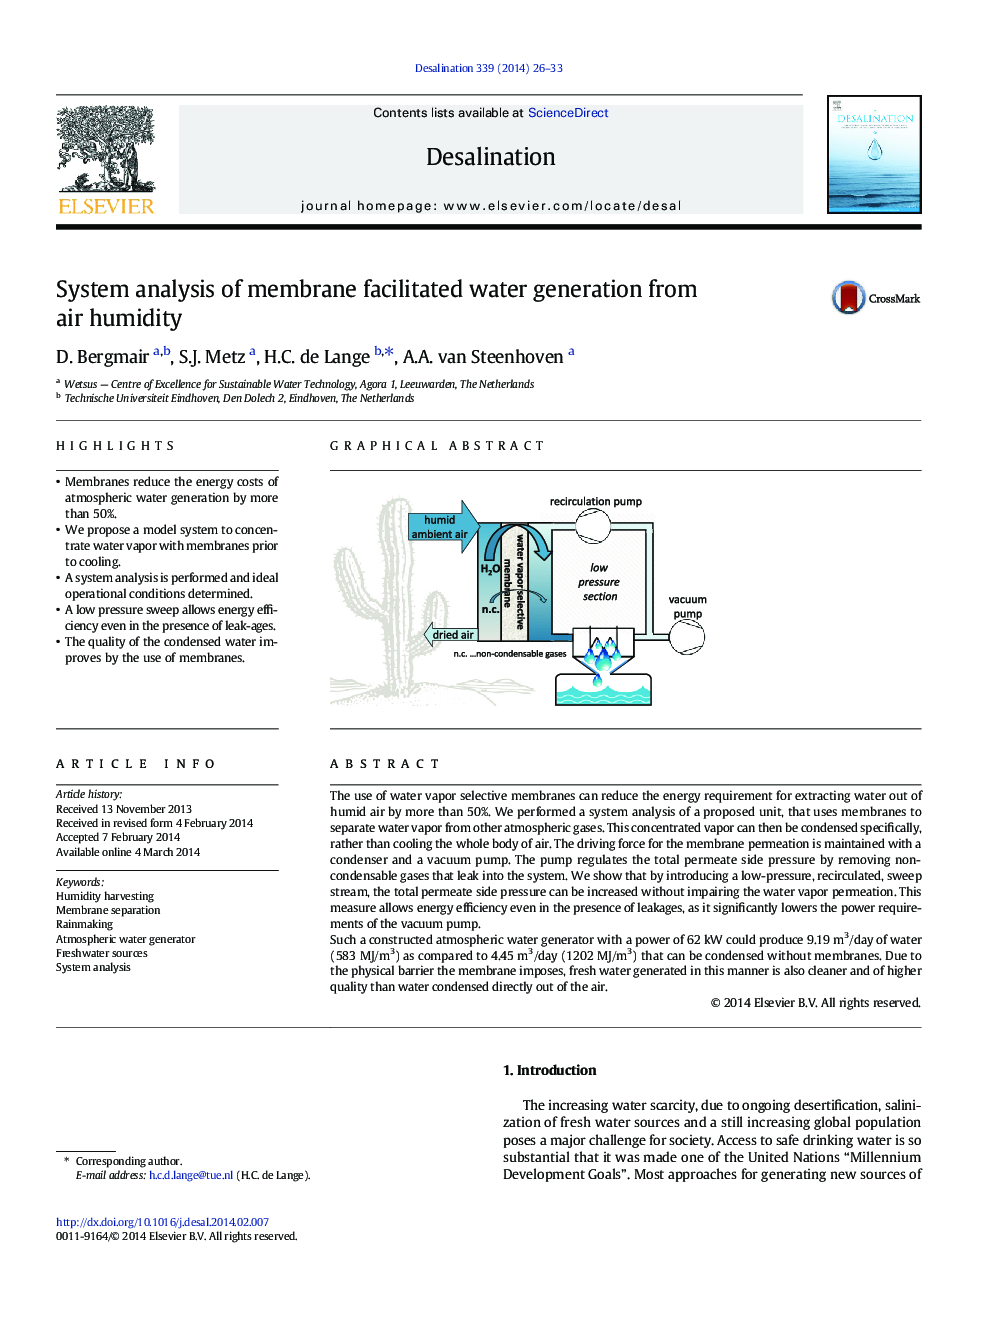 System analysis of membrane facilitated water generation from air humidity